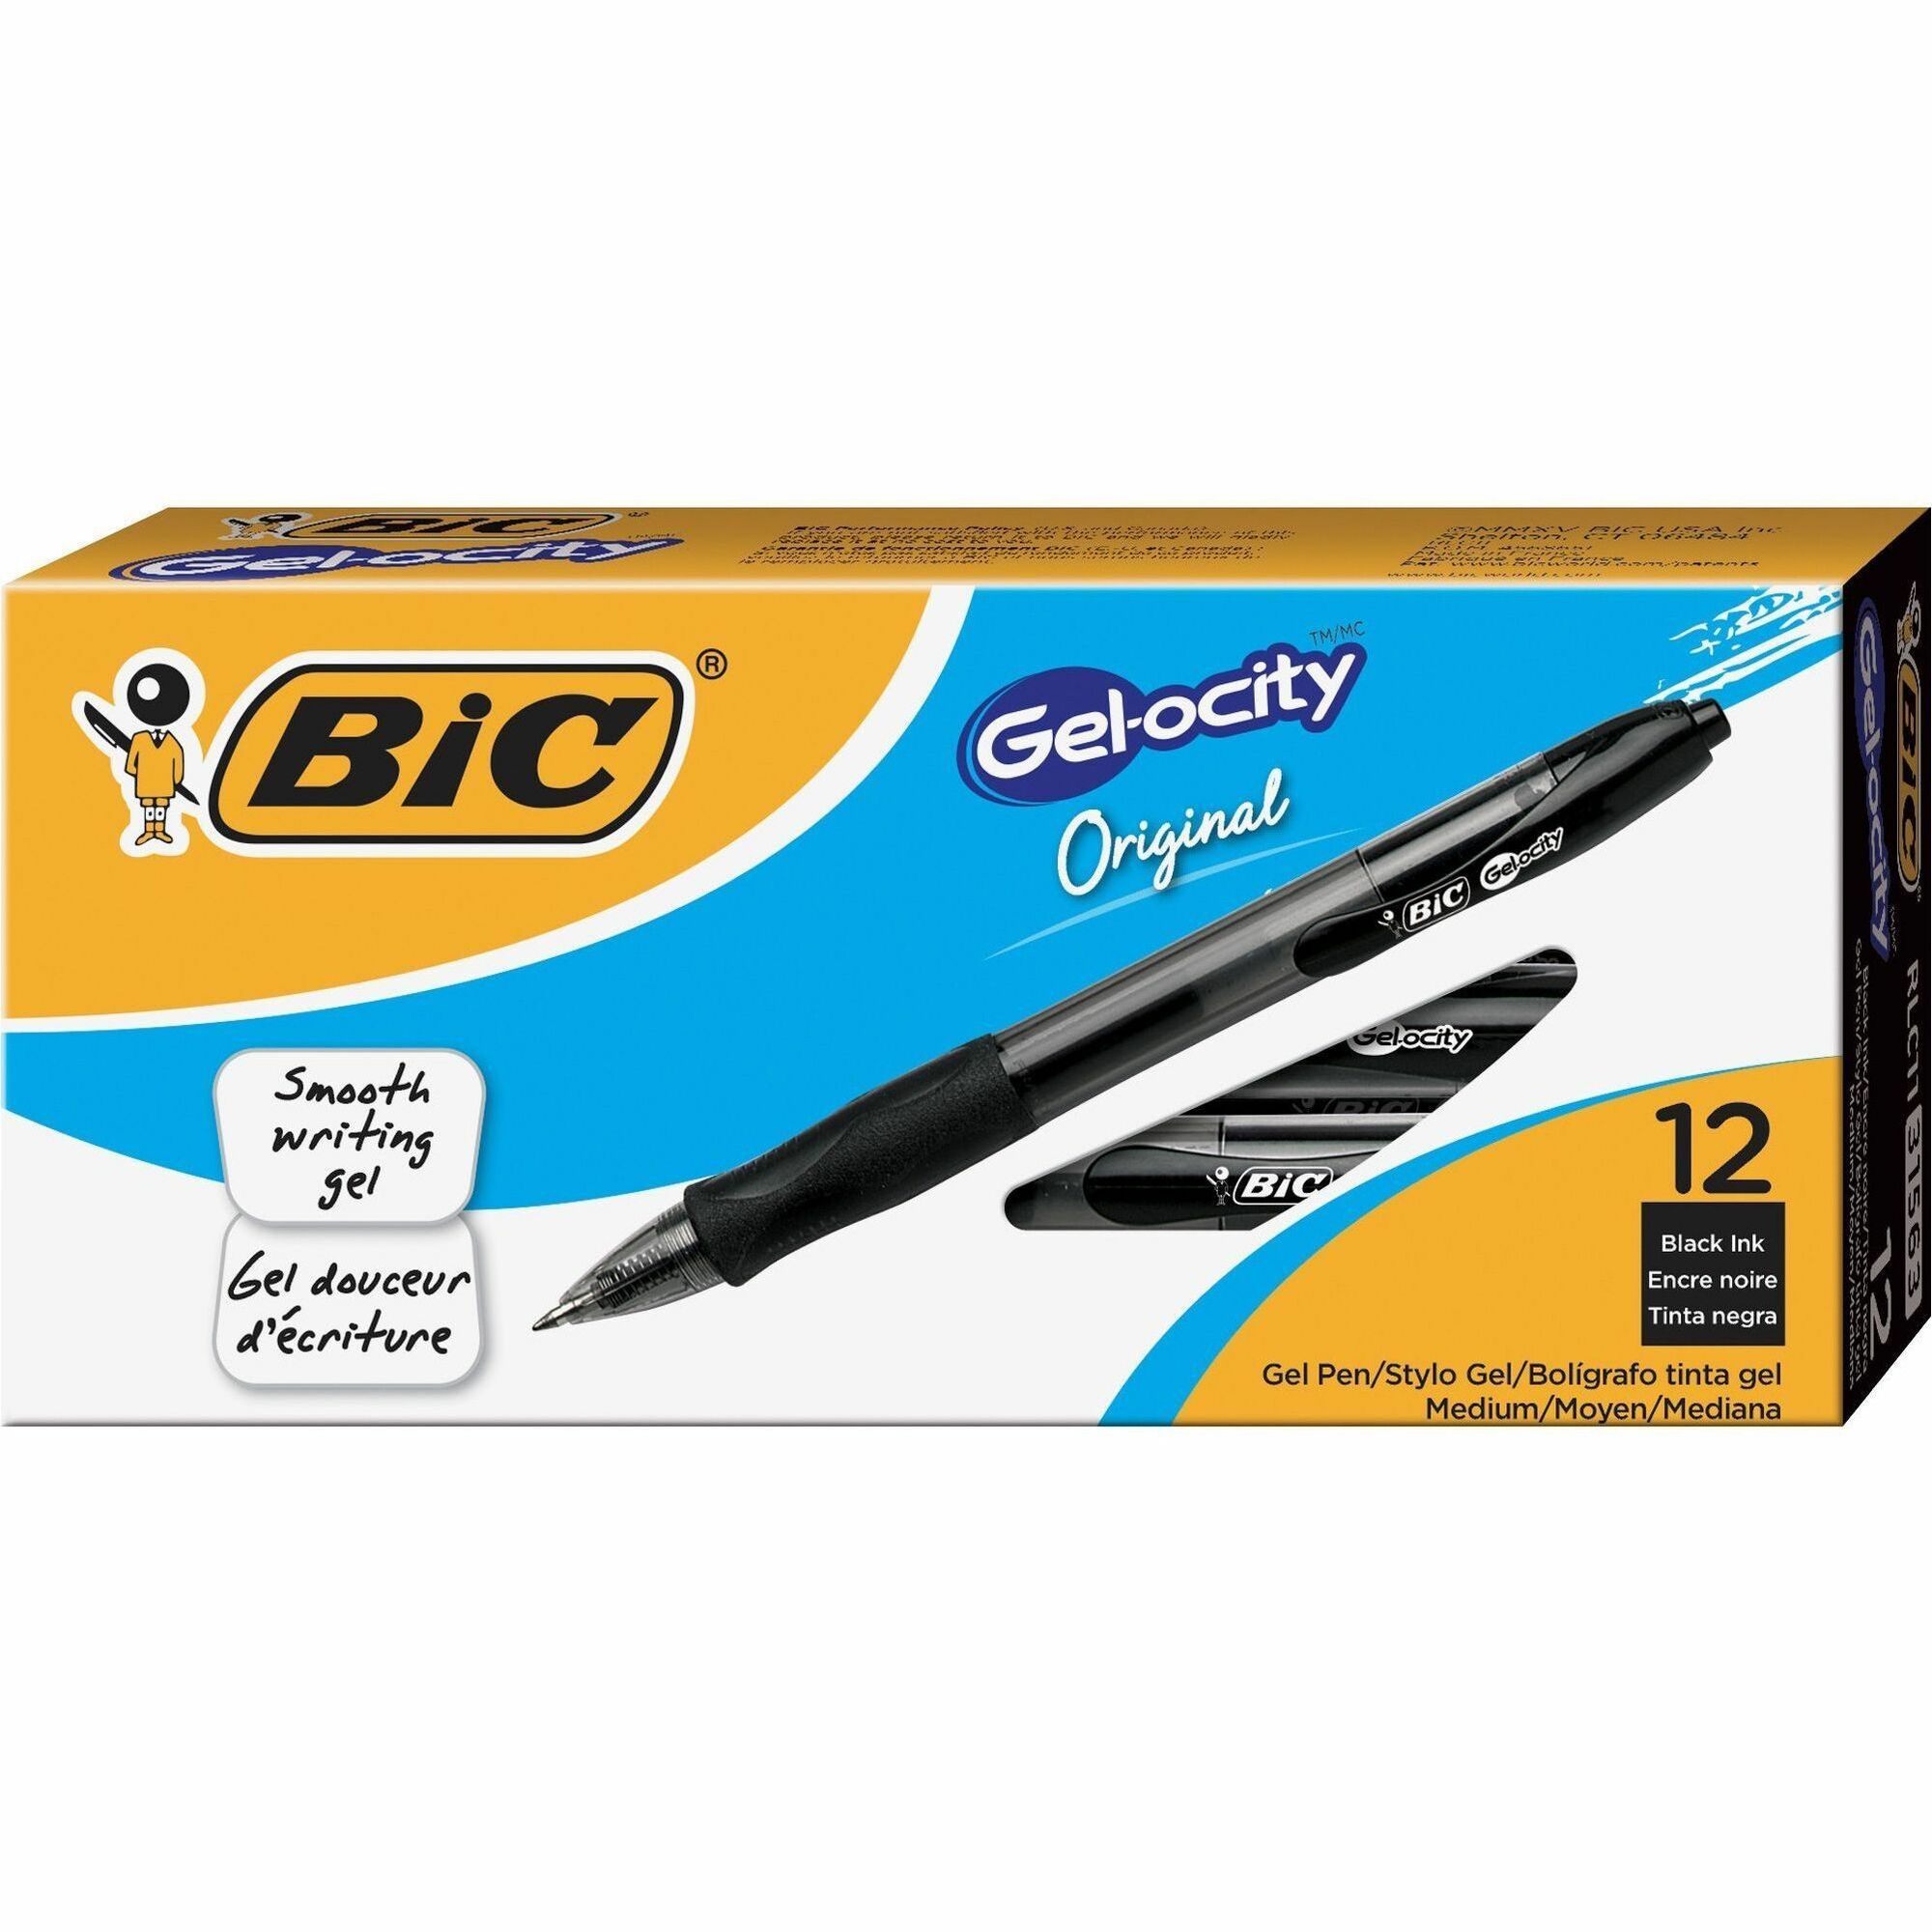 writing-correction-supplies-gel-ocity-quick-dry-gel-pens-8-count-new